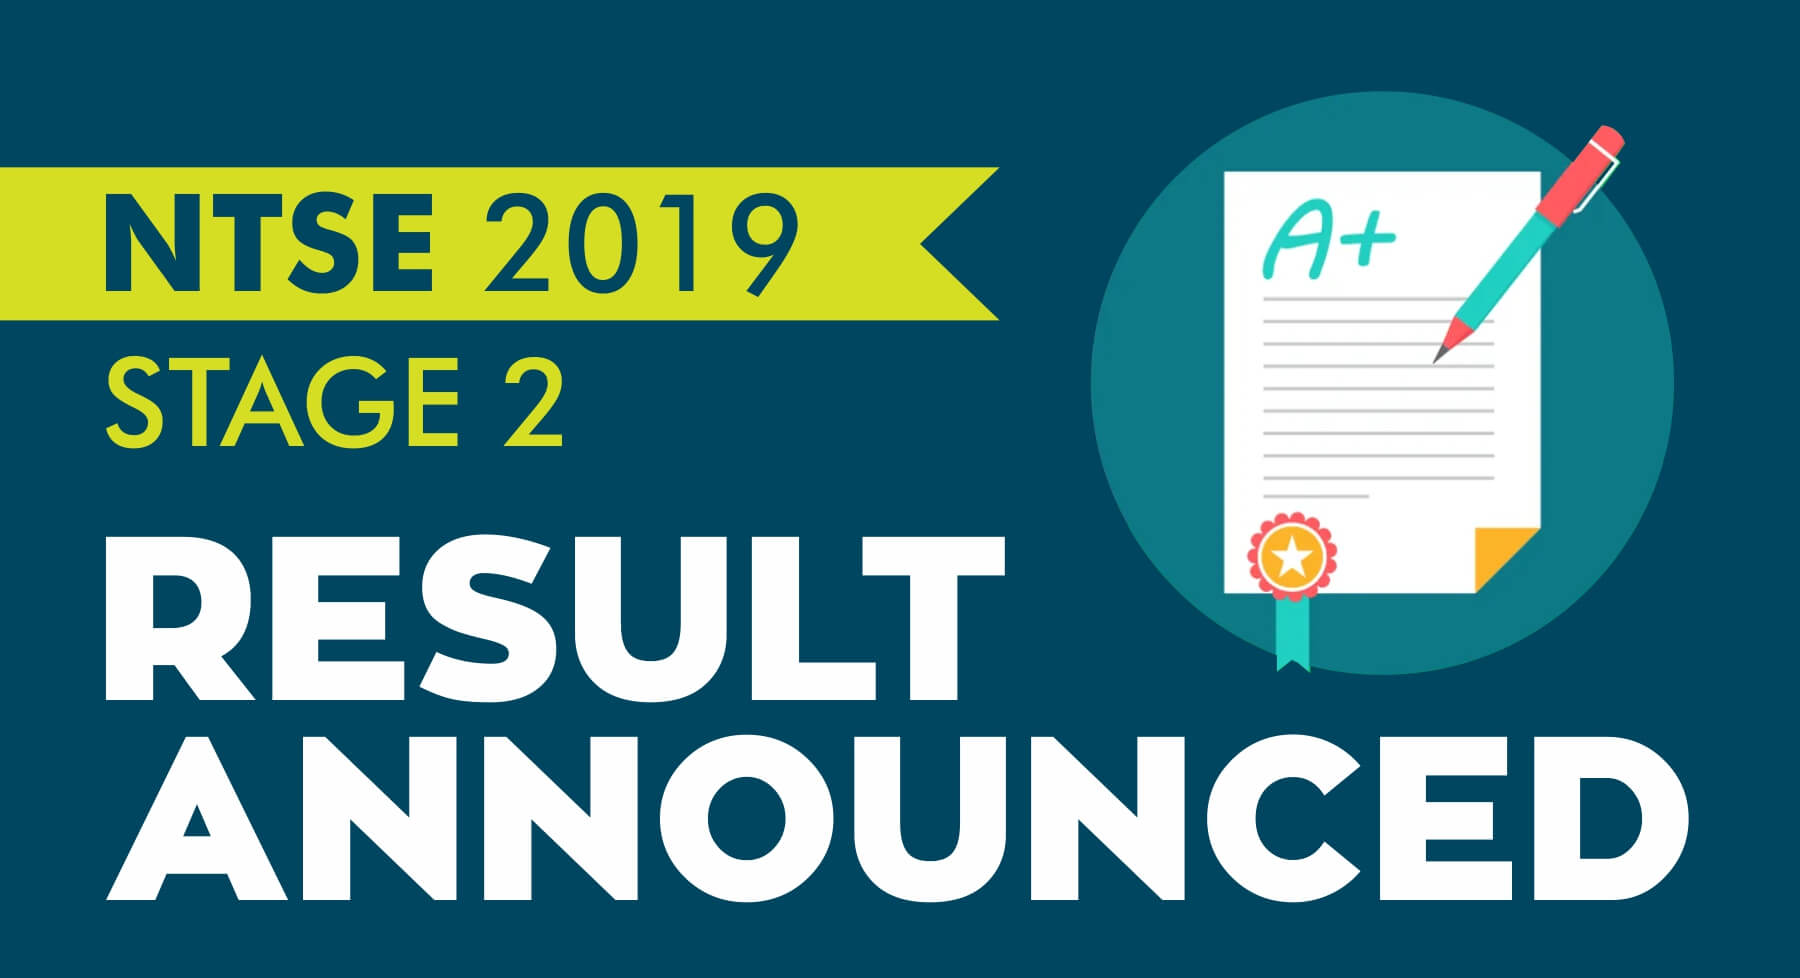 NTSE 2019 Stage 2 Result: Announced